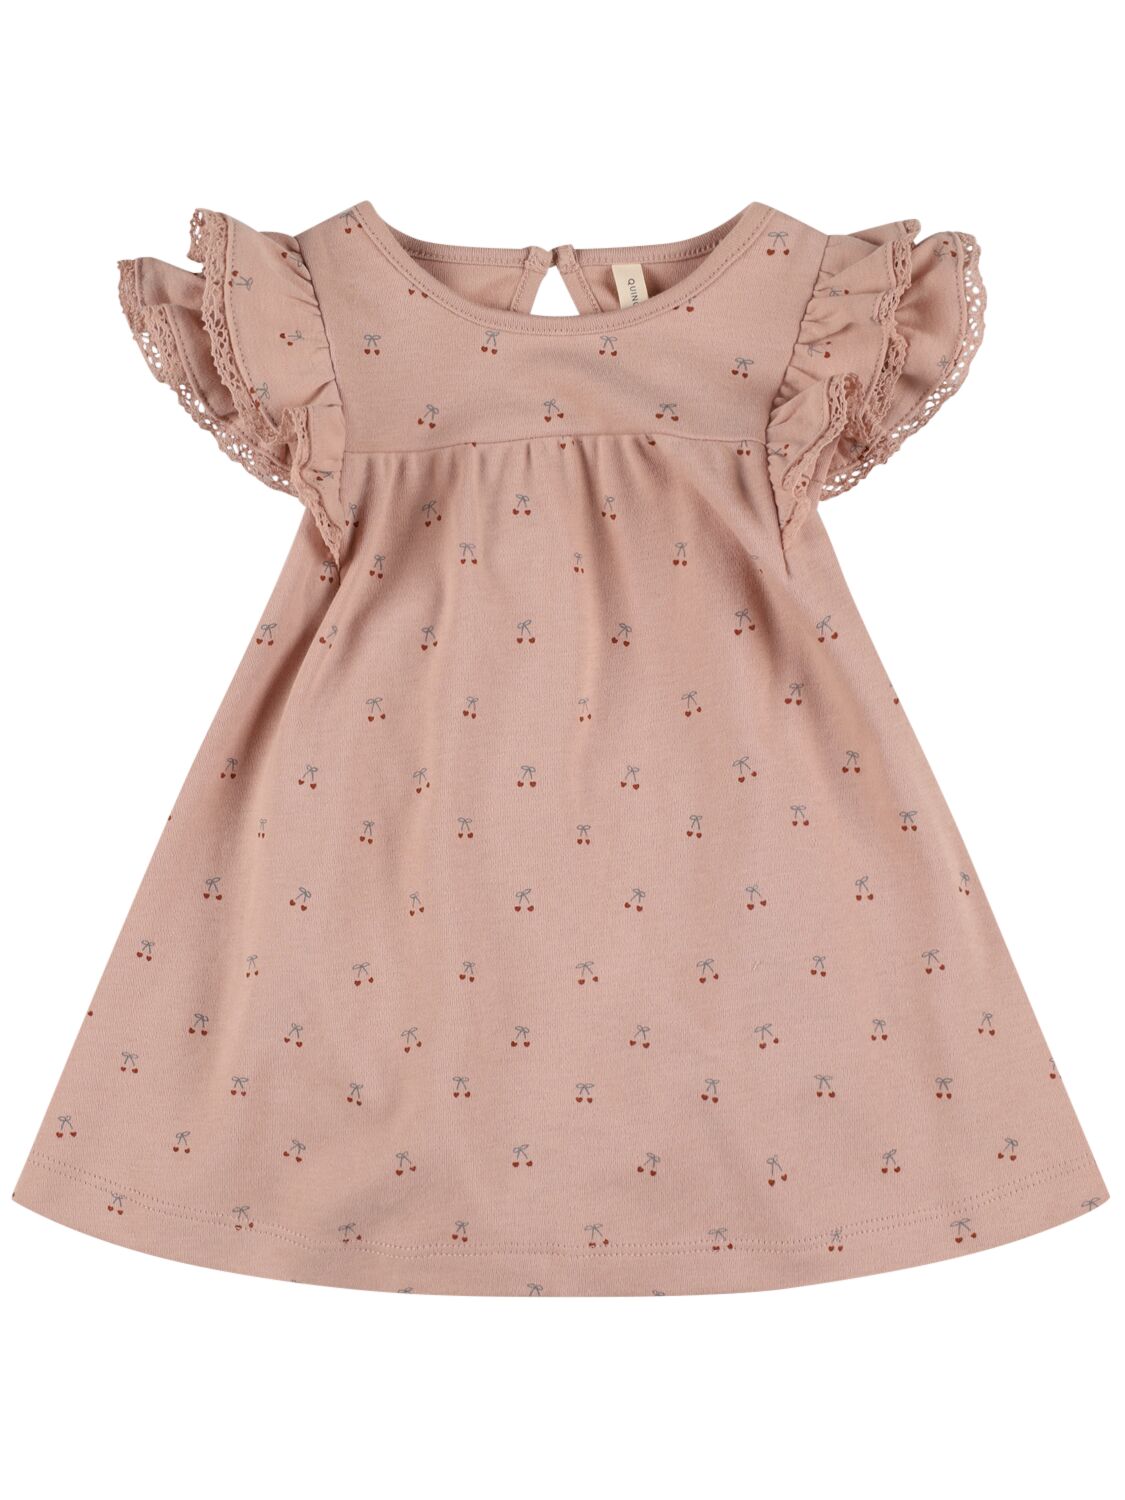 Quincy Mae Kids' Printed Organic Cotton Dress In Pink